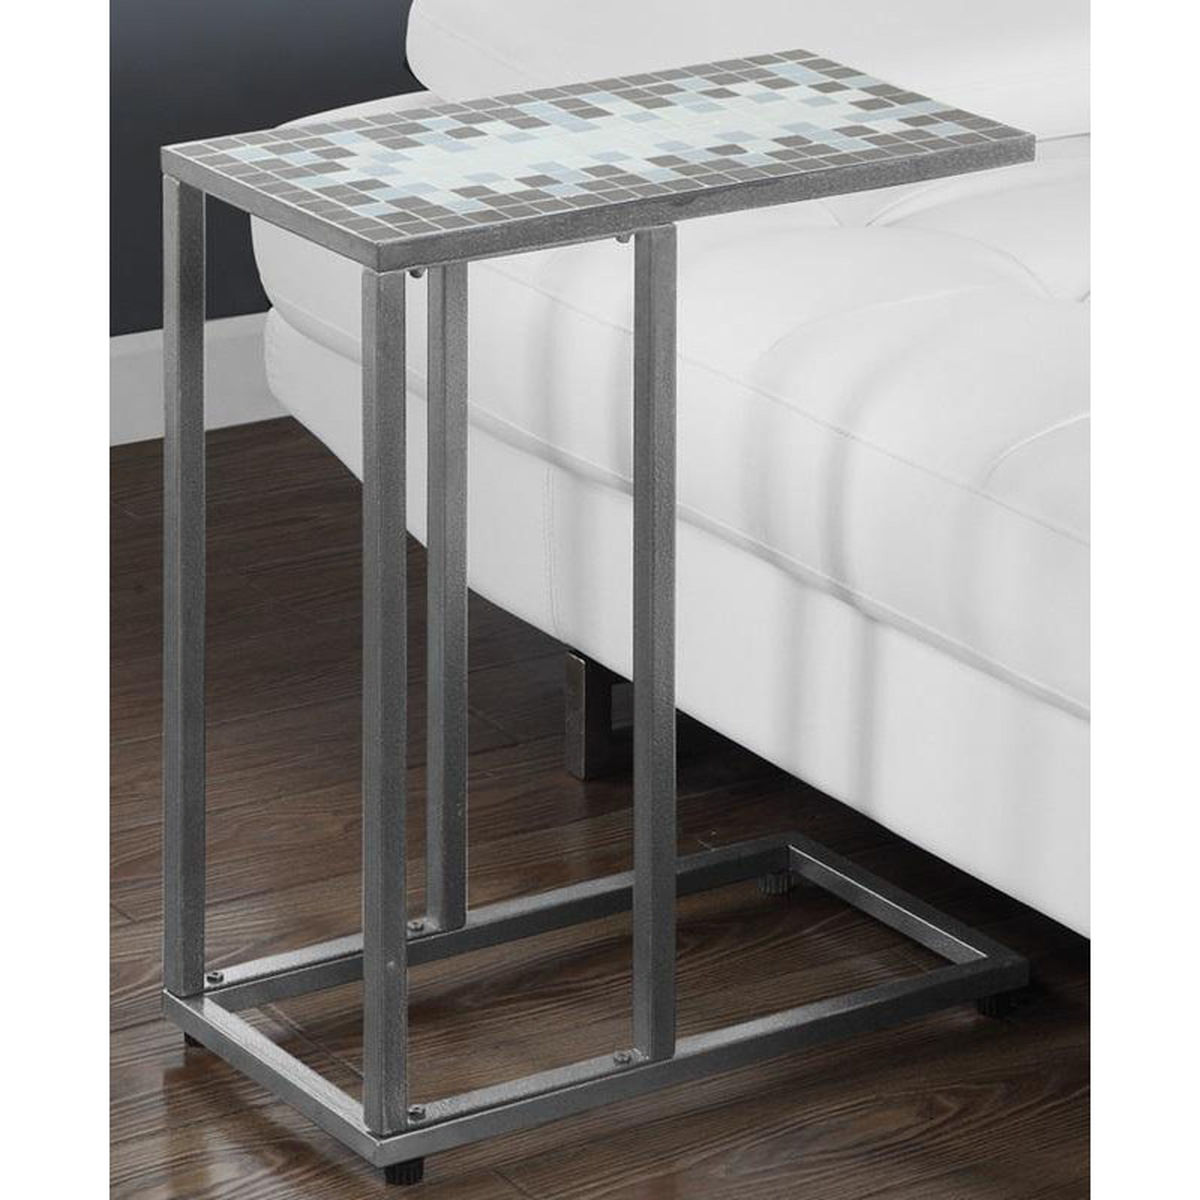 hammered metal accent table bizchair monarch specialties msp main grey our slide under sofa with gray and blue vintage retro furniture pier one imports locations plastic cloth